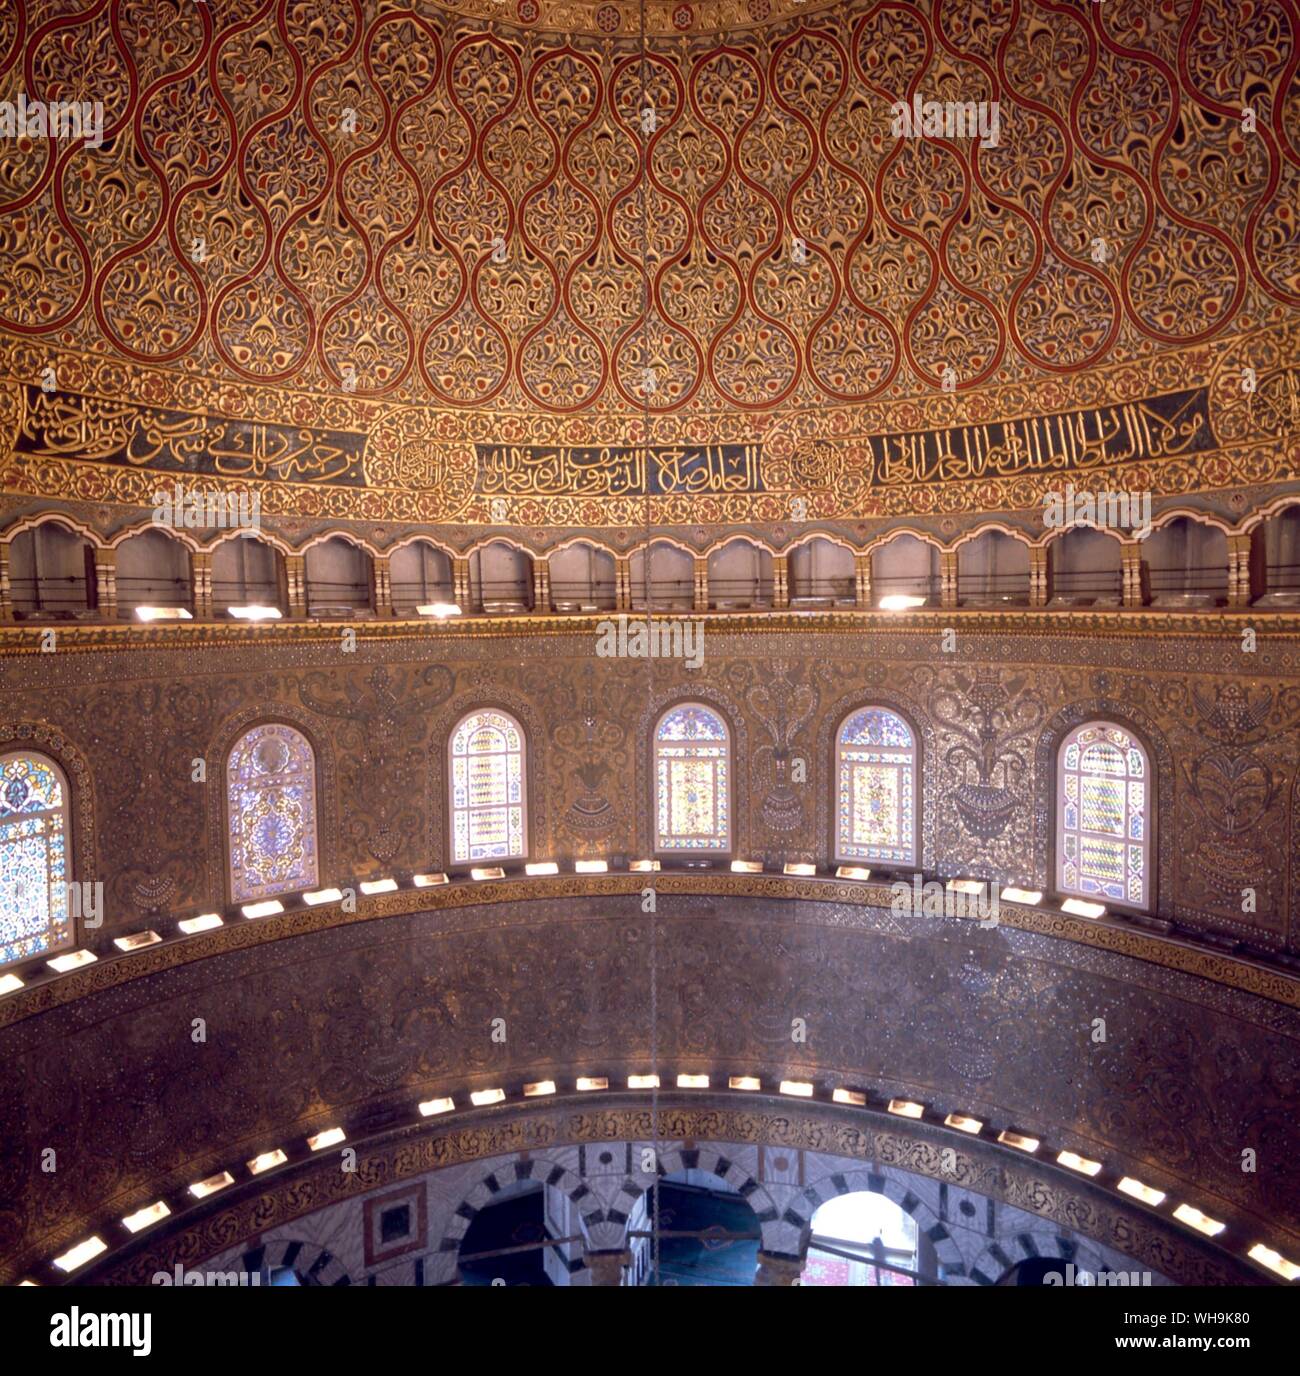 Dome Of The Rock Interior Jerusalem Stock Photos Dome Of